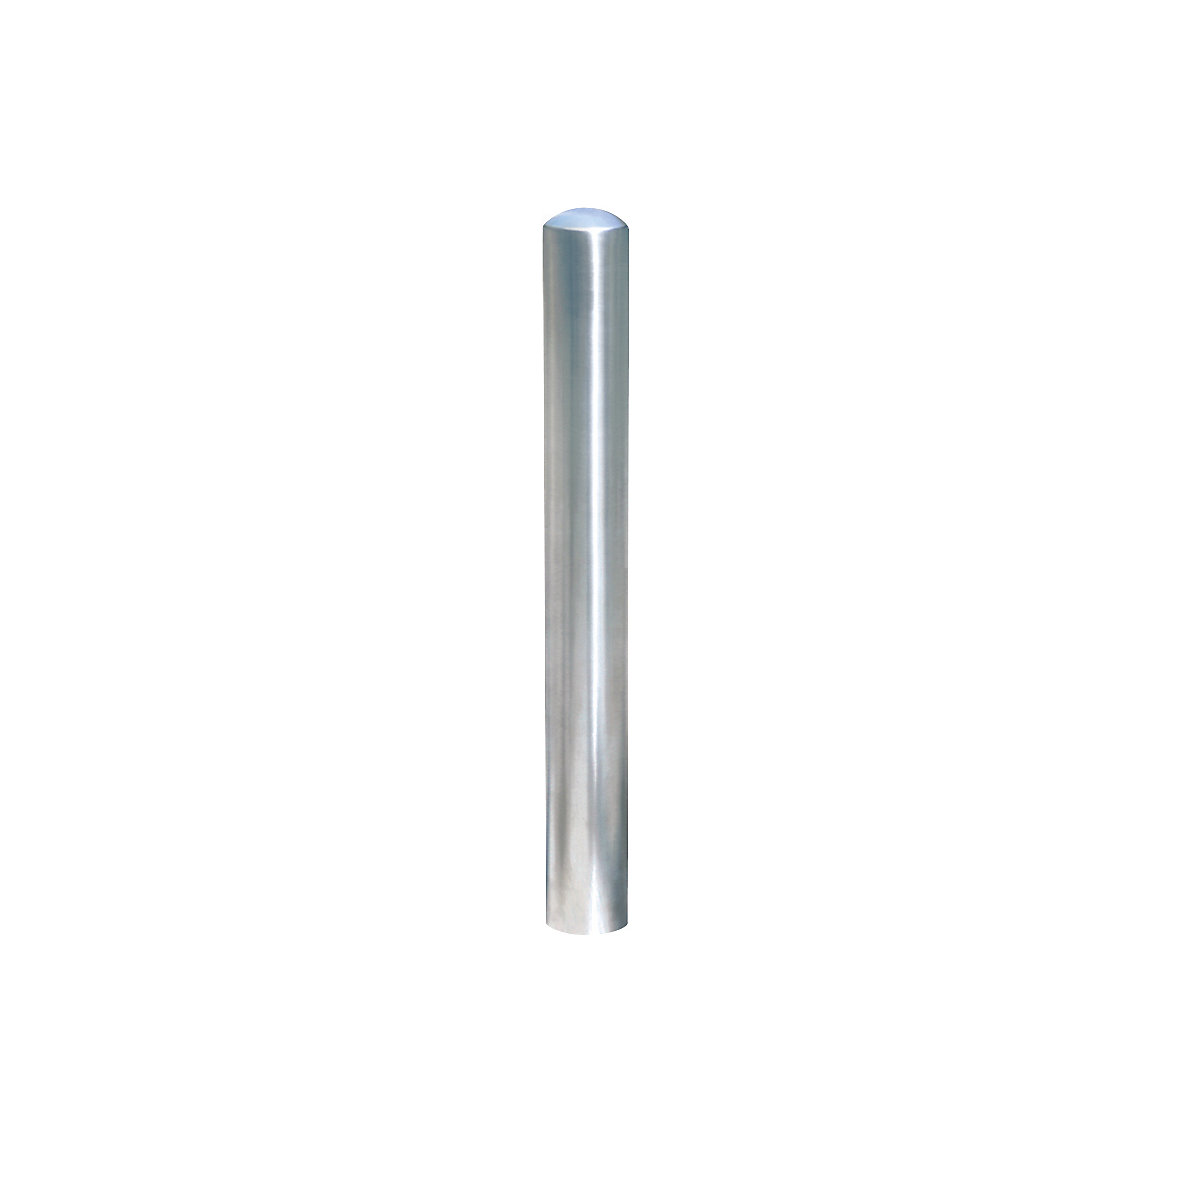 Stainless steel bollard, for bolting in place, Ø 108 mm-7